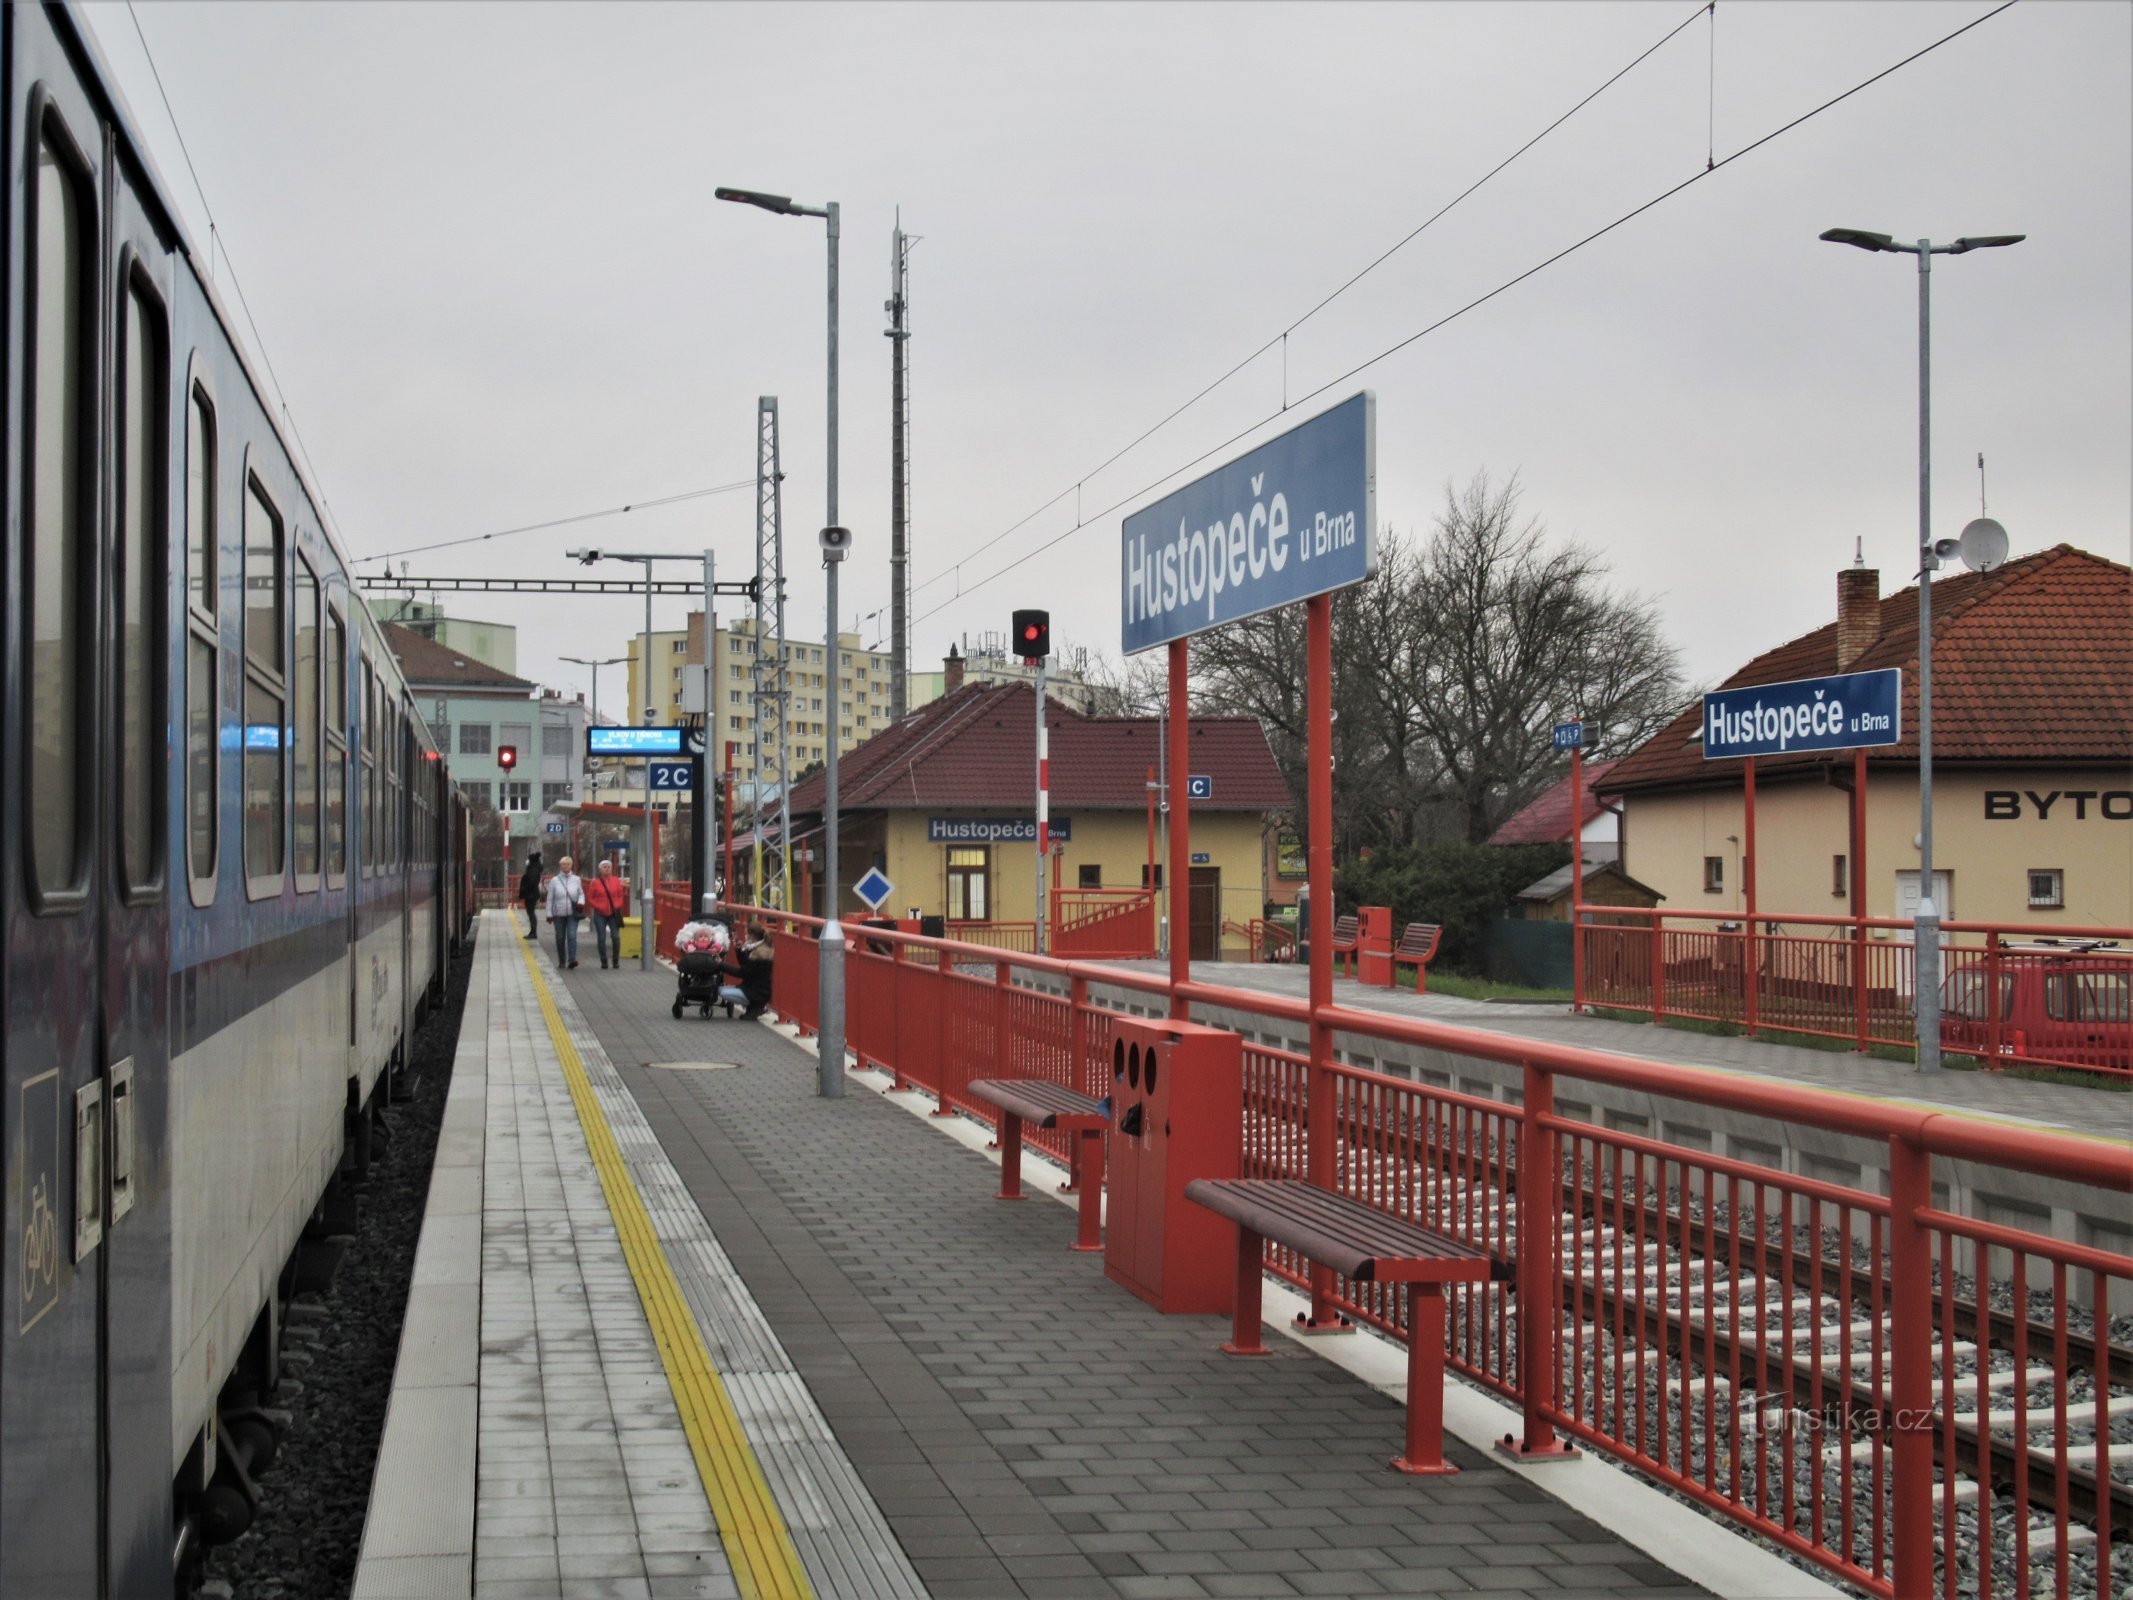 Newly opened electrified station with train arrival in December 2020